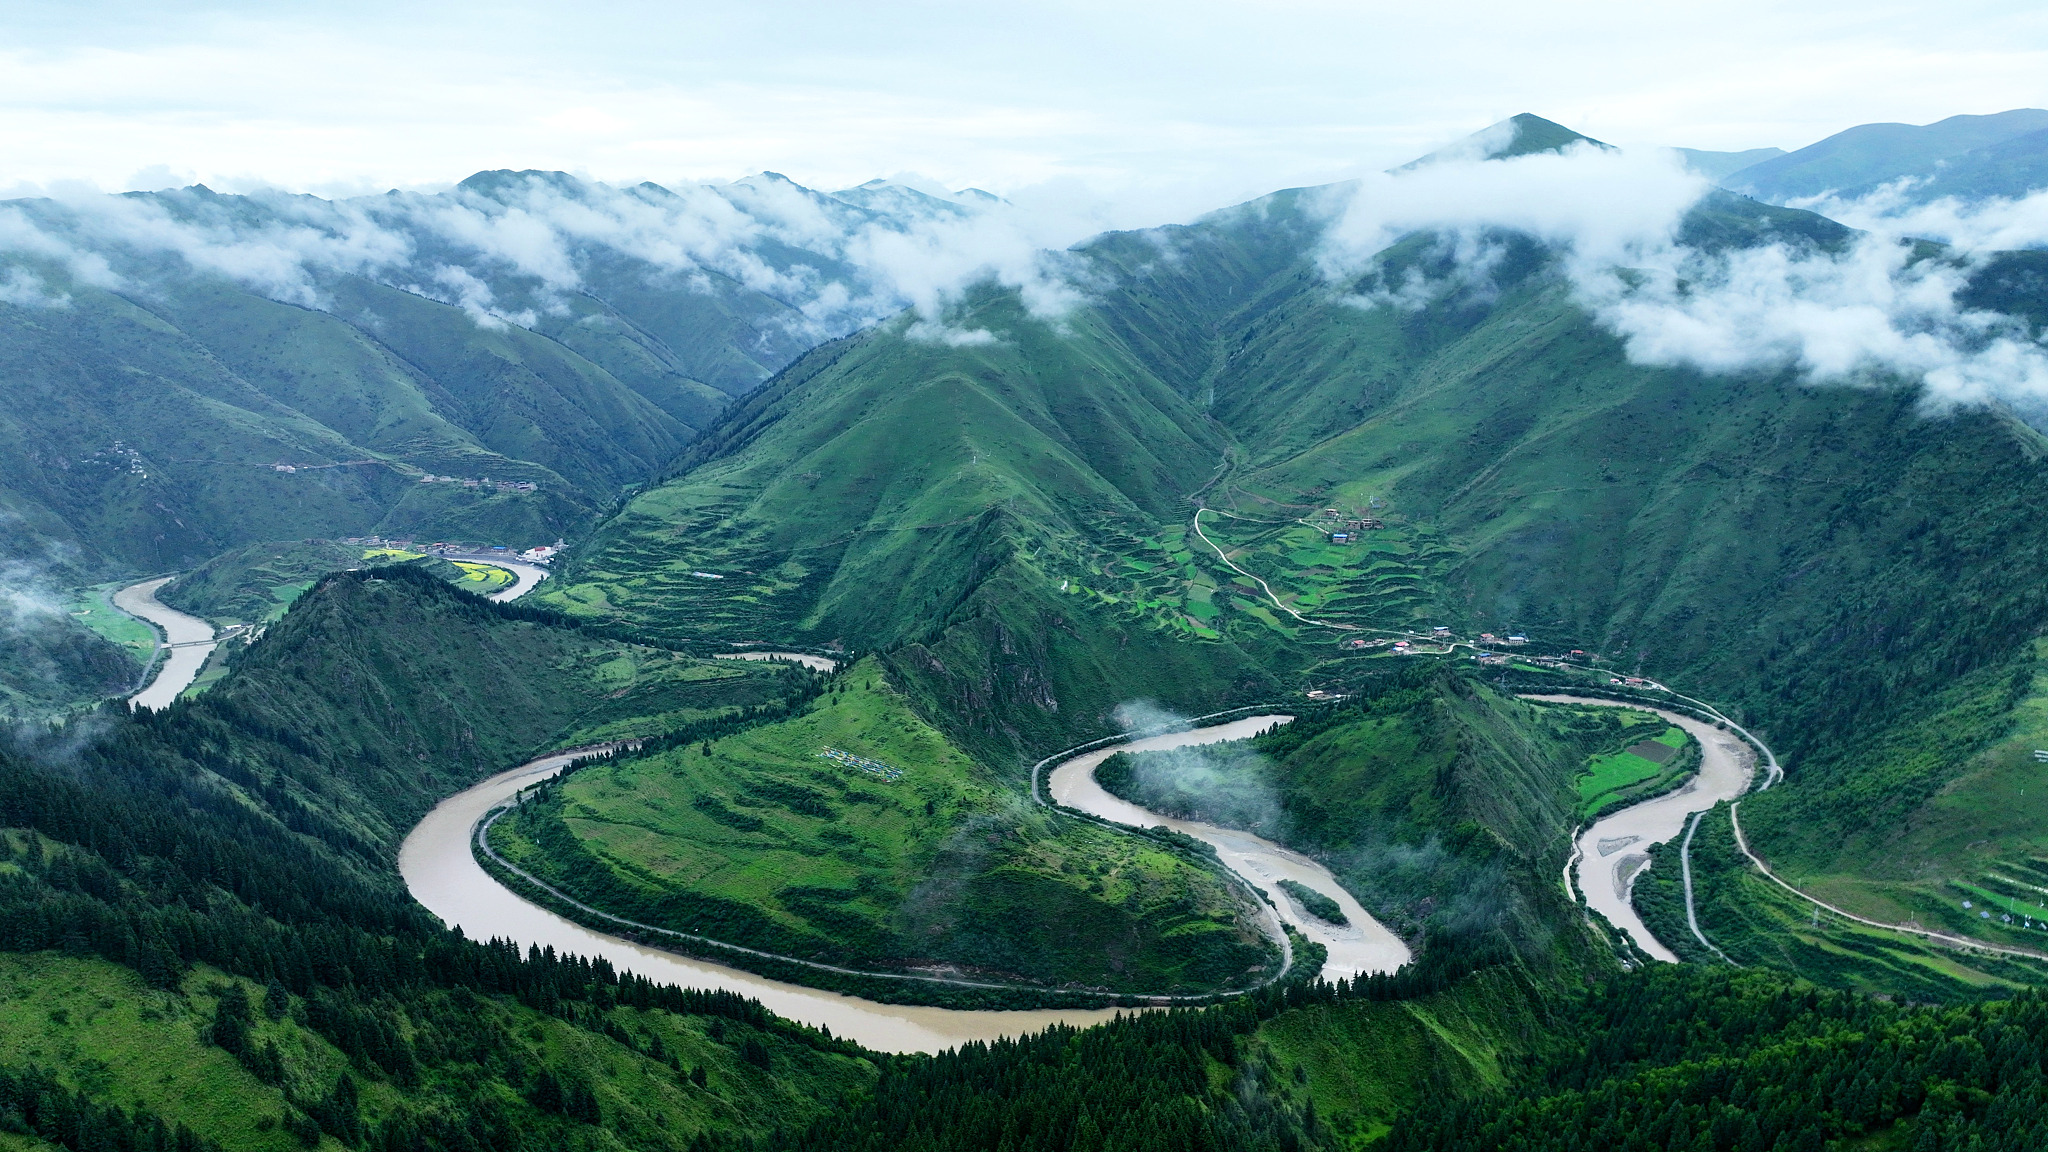 An aerial view of the Sanjiangyuan National Park in Yushu, northwest China's Qinghai Province, October 12, 2022. /CFP